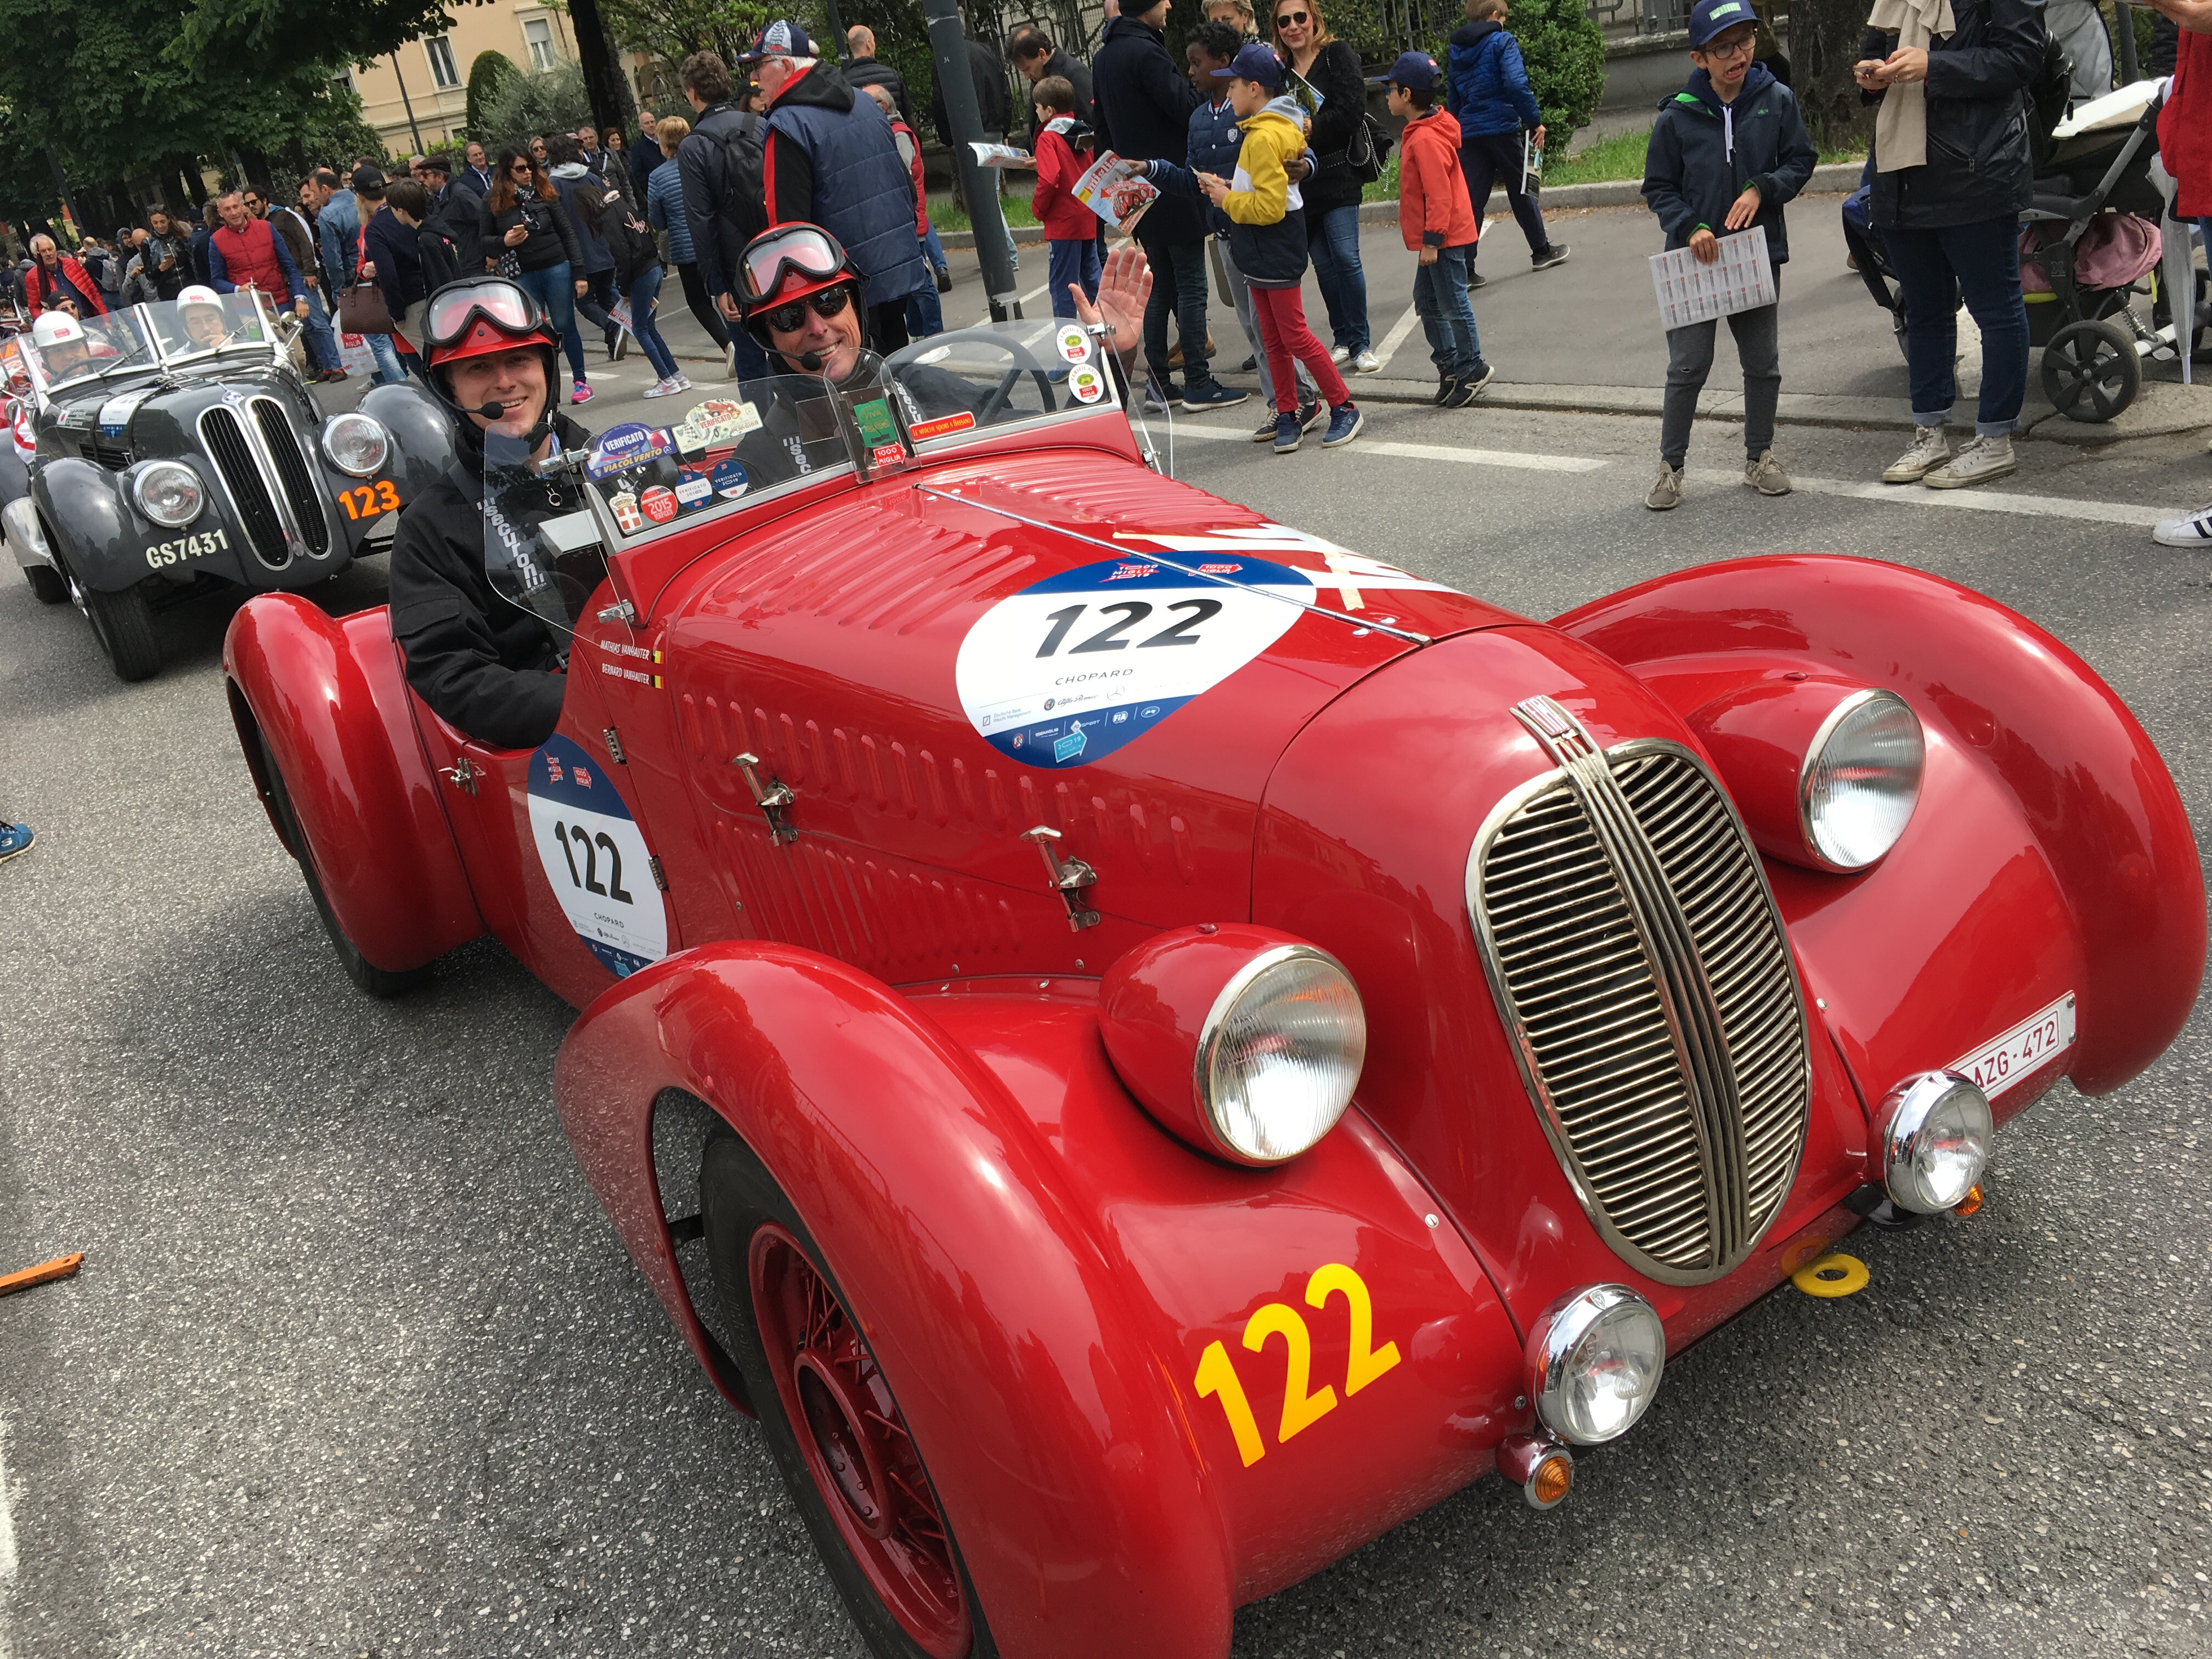 The authentic Mille Miglia experience